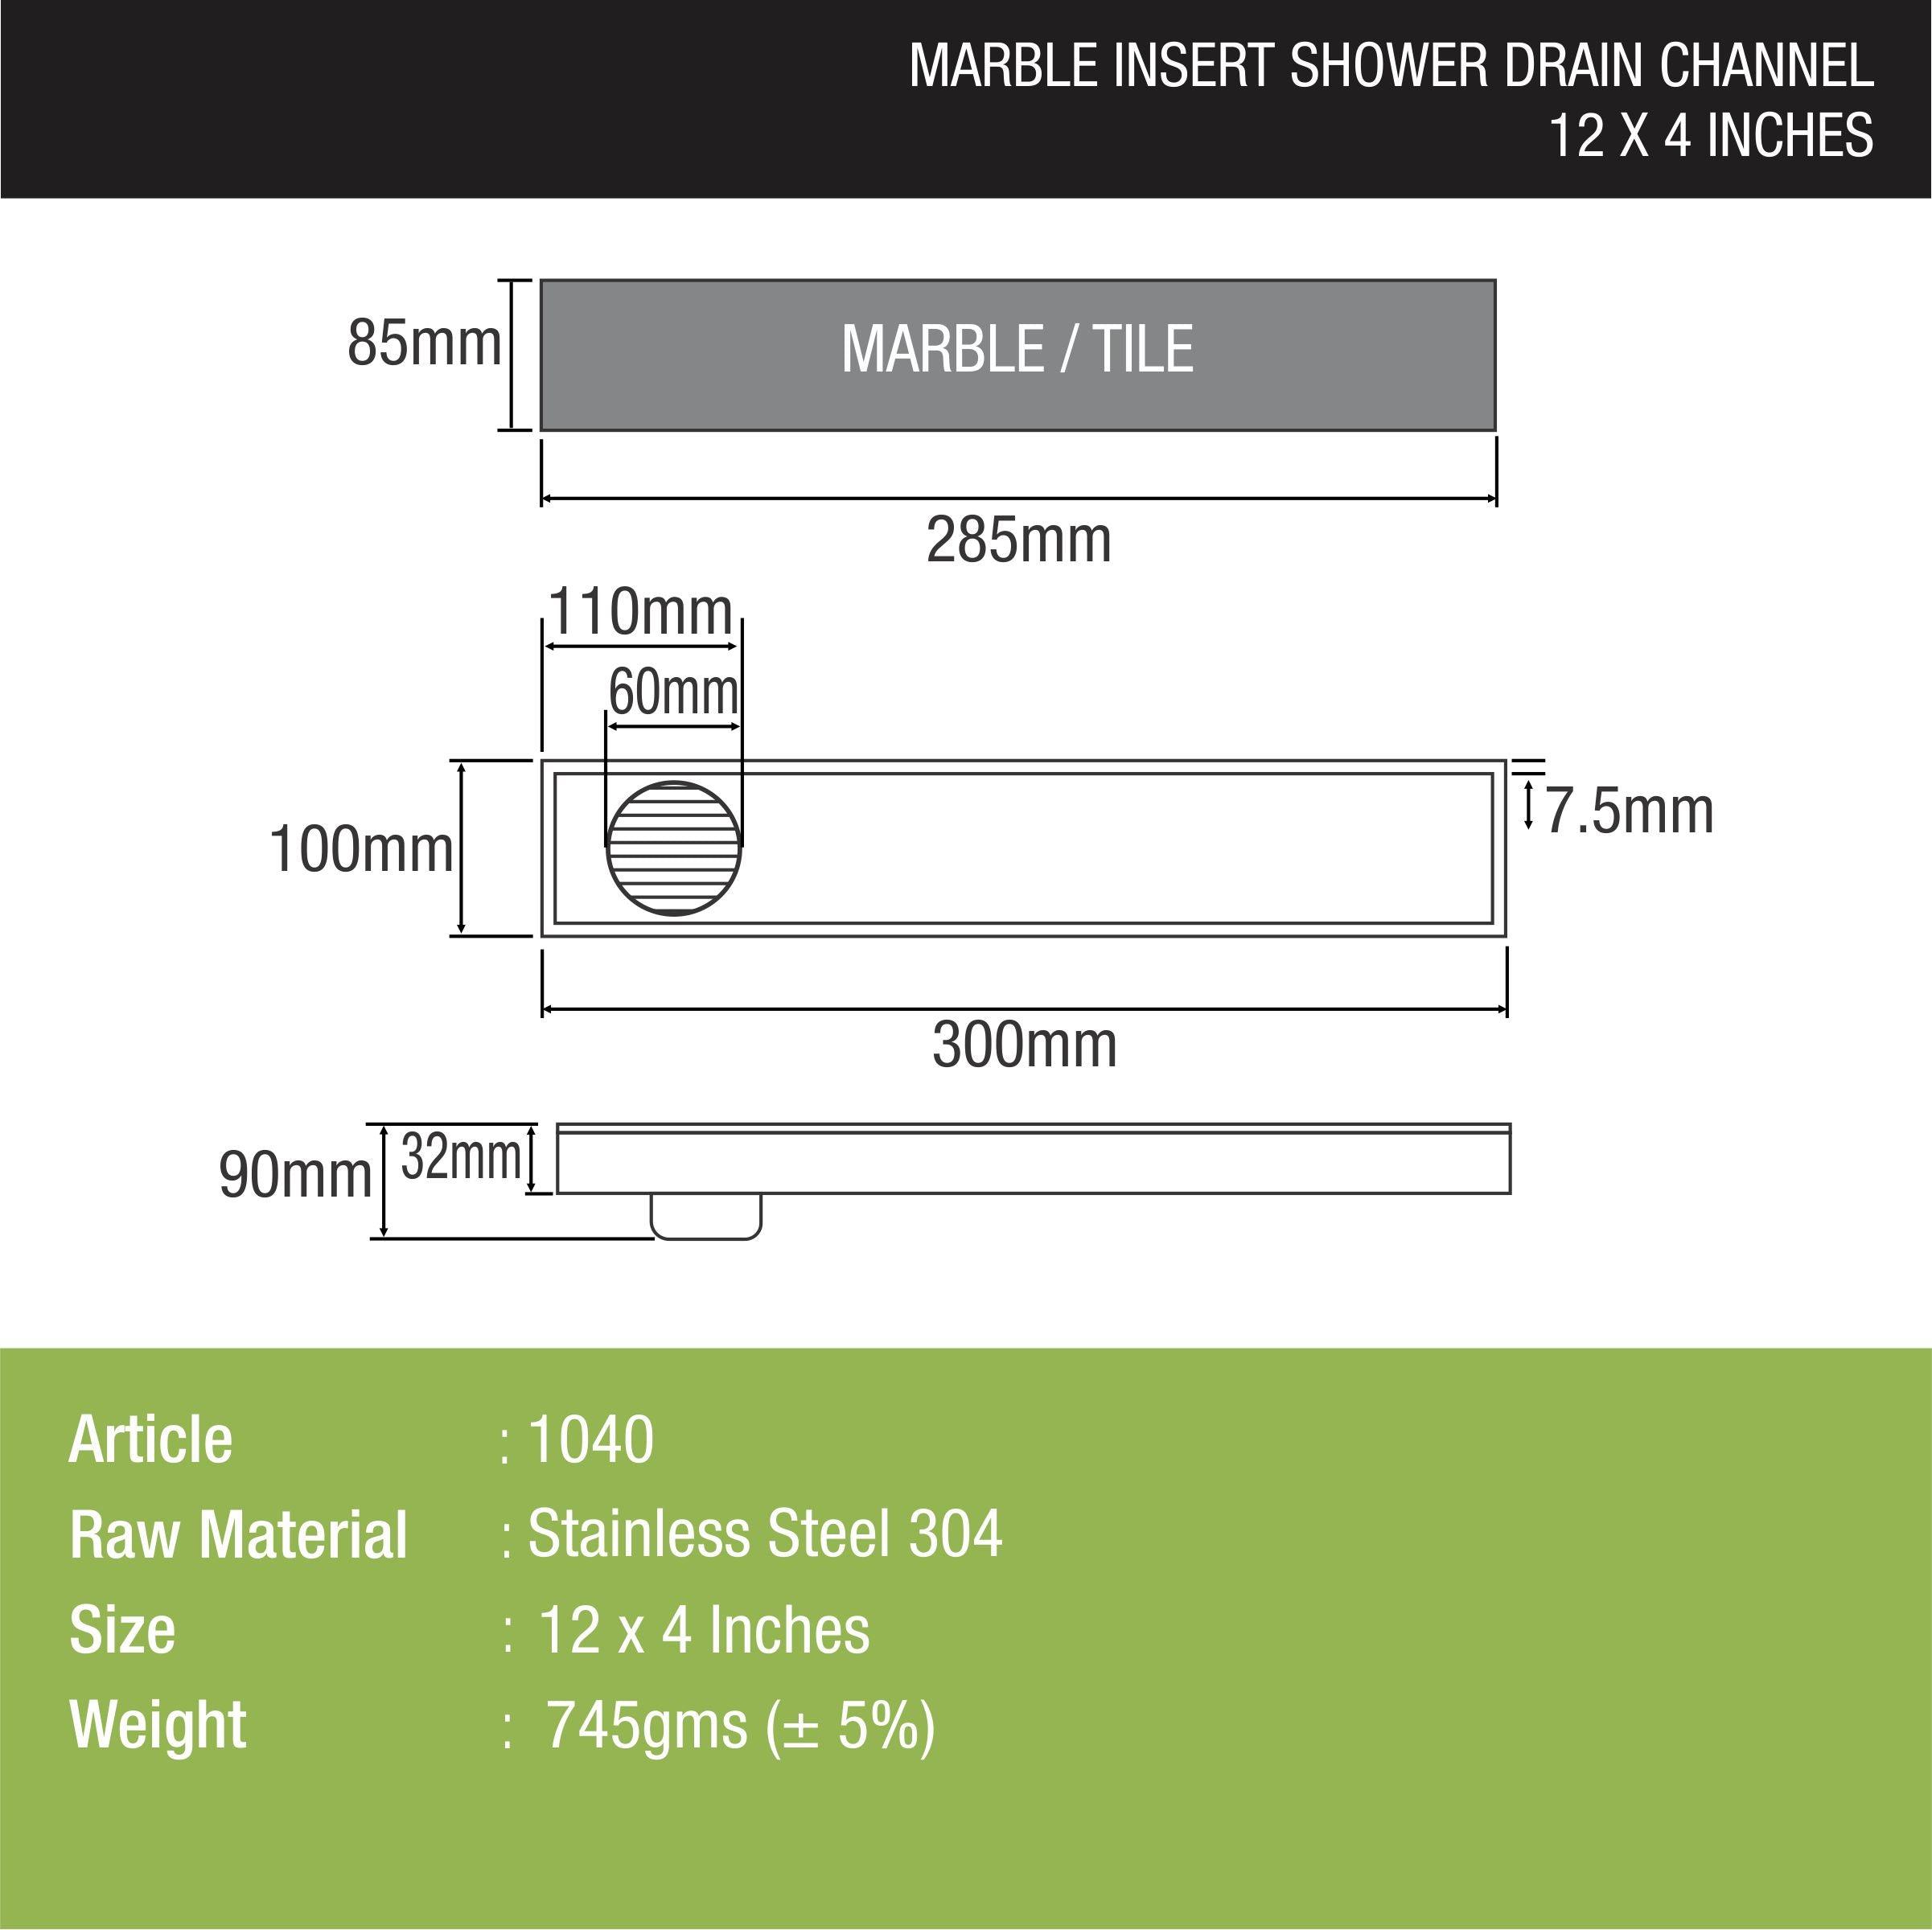 Marble Insert Shower Drain Channel (12 x 4 Inches) dimensions and sizes